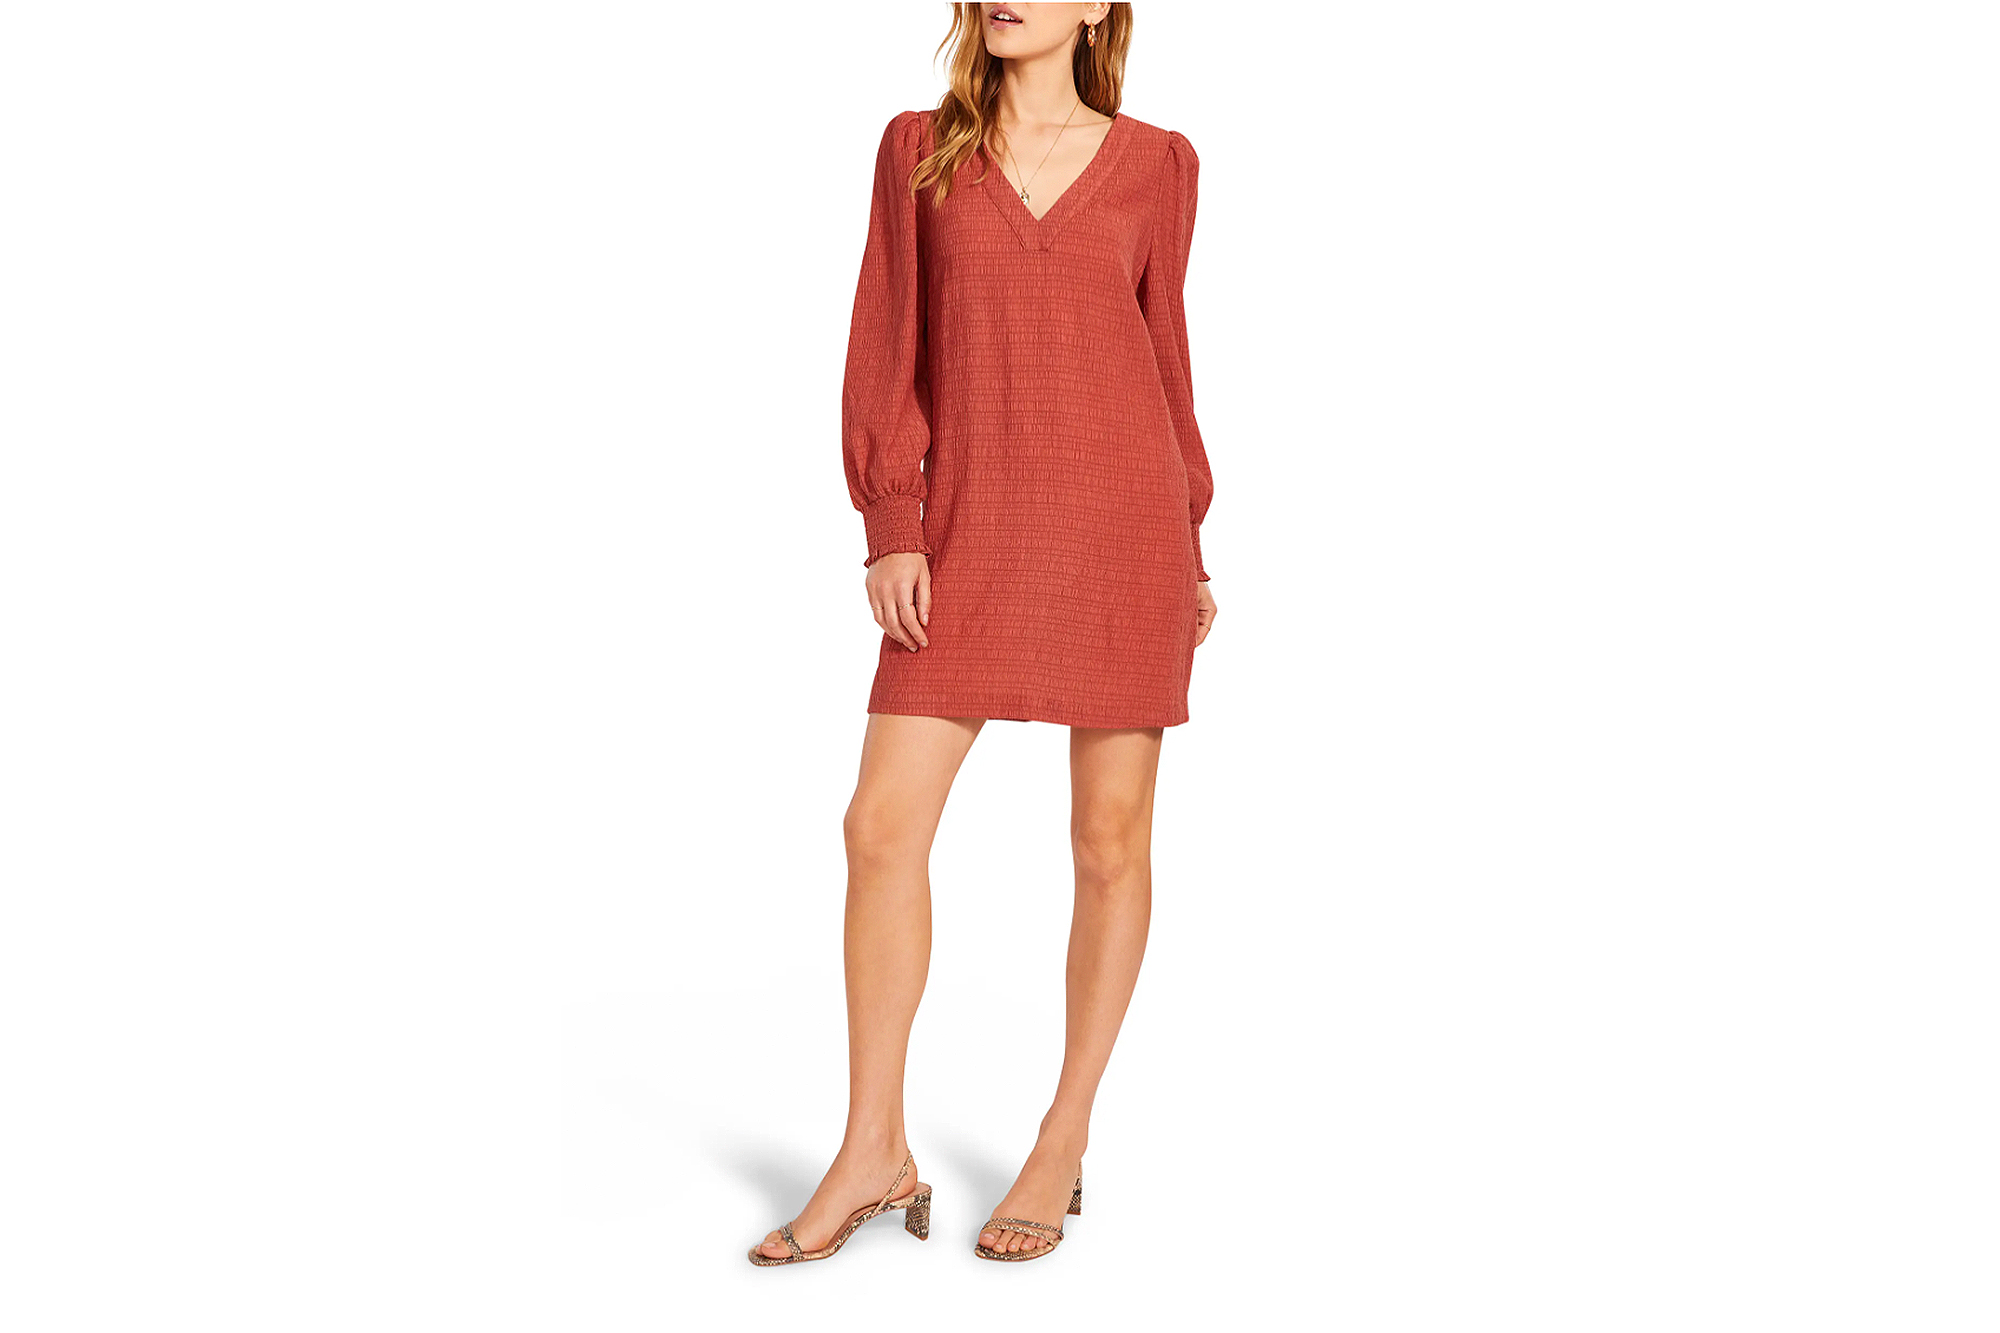 Nordstrom Anniversary Sale: Our Absolute Favorite Shift Dress